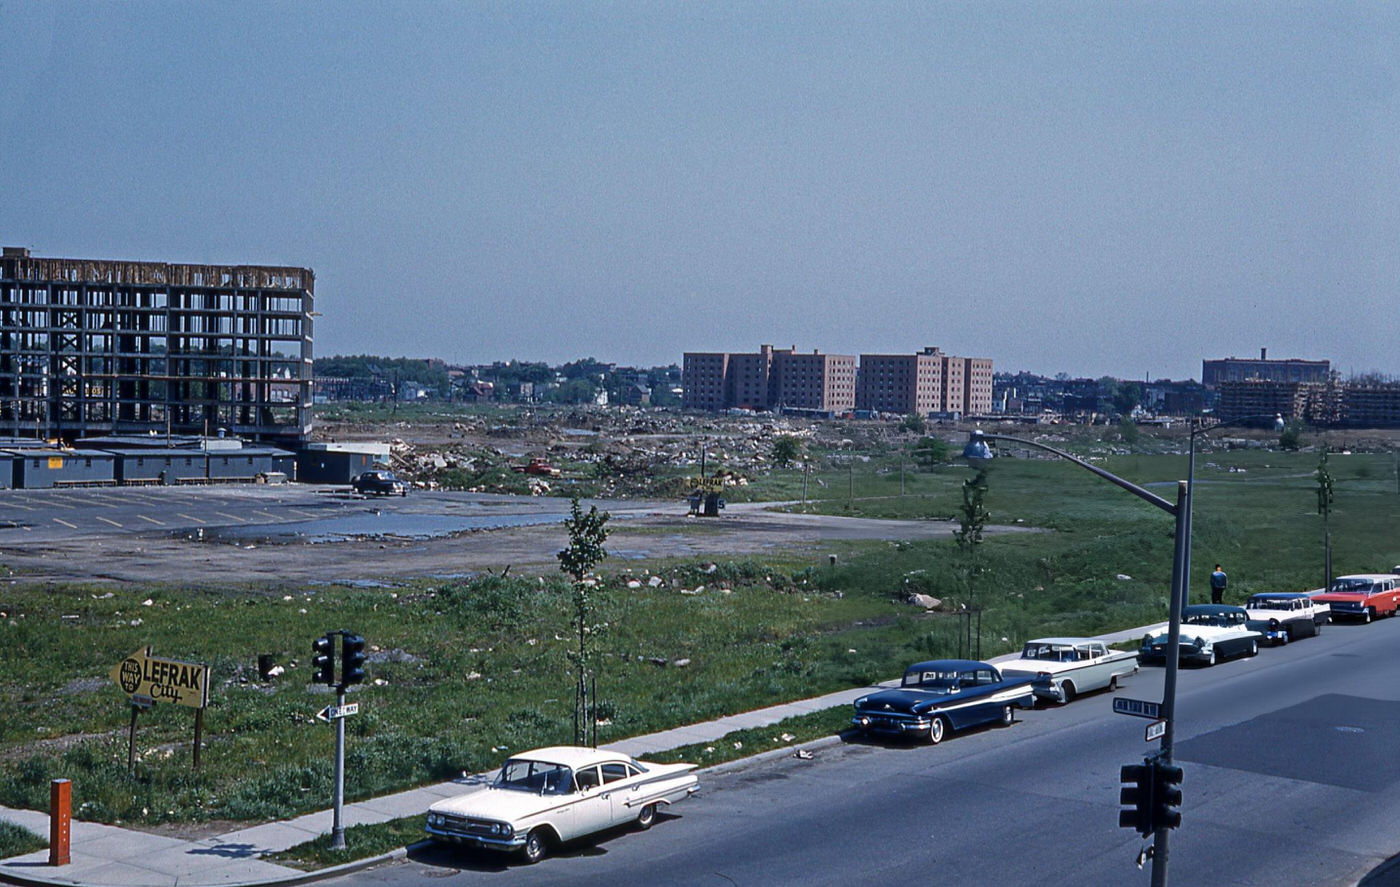 Construction Of Twenty, 16-Story Residential Apartment Buildings Known As Lefrak City Begins In Corona, 1960S.